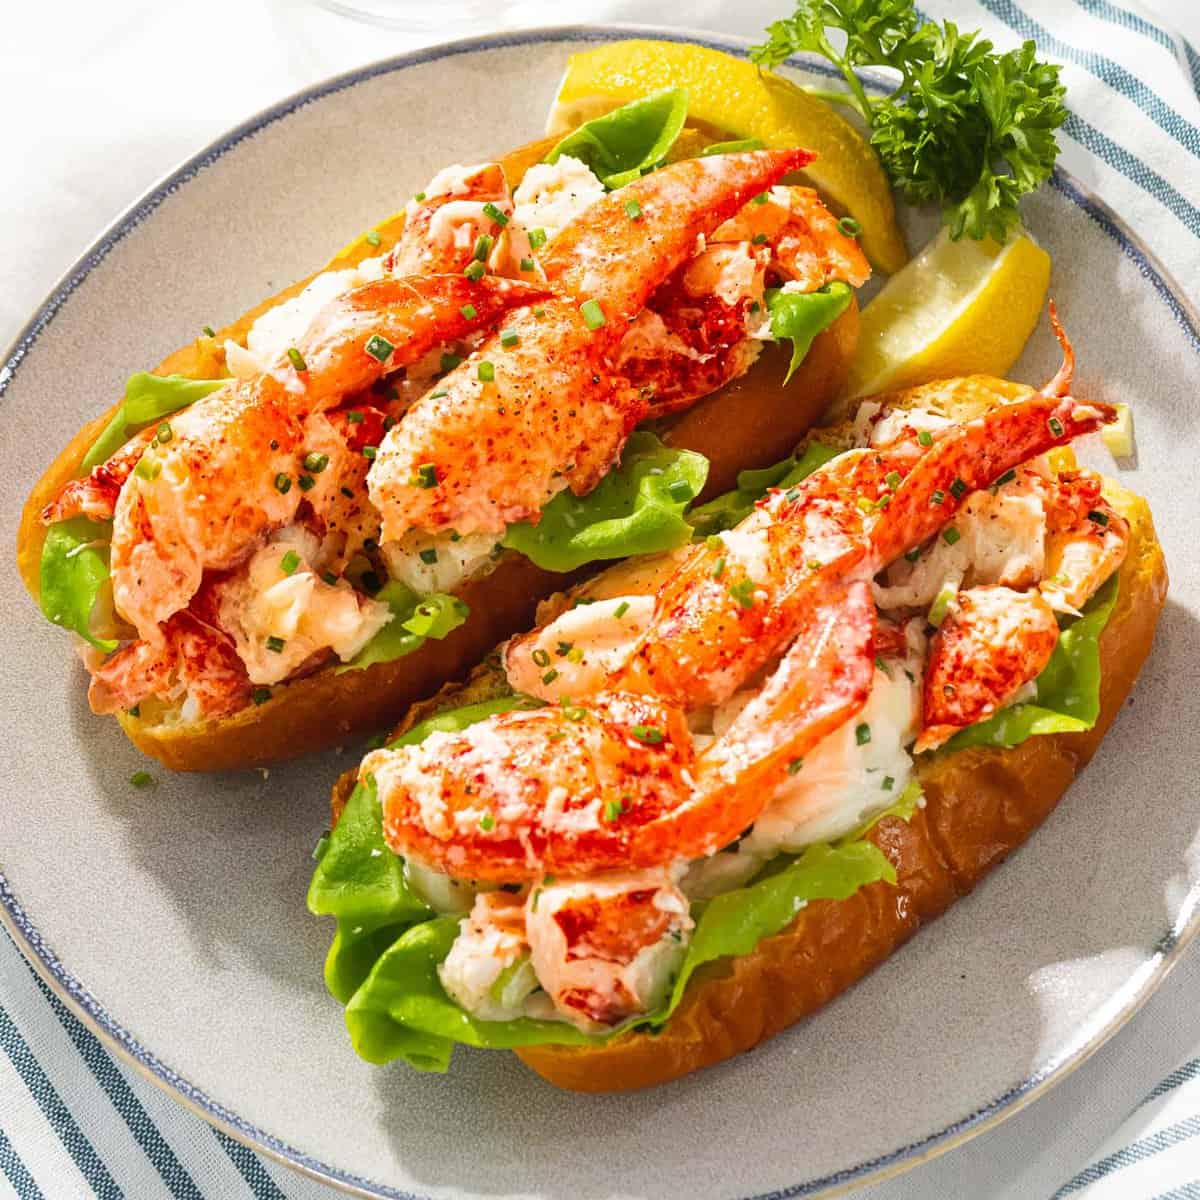 Maine lobster roll with lobster claws dressed in mayo with chives and lettuce.